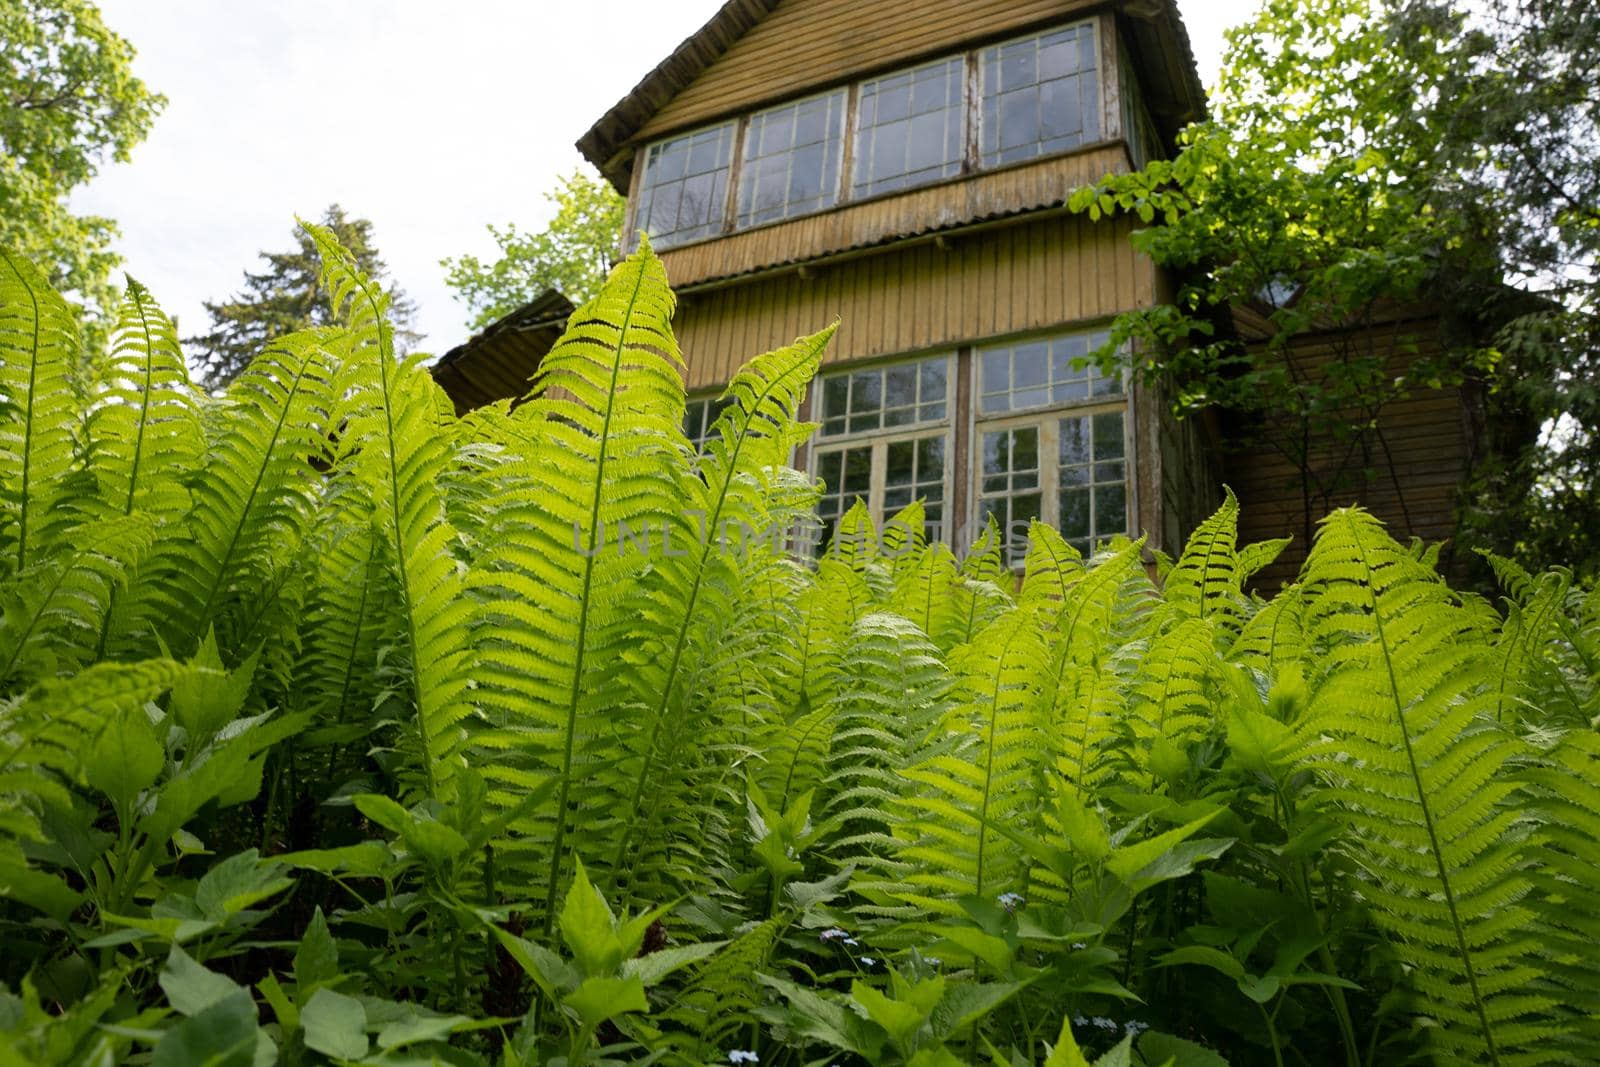 View of an old wooden house through fern bushes by Varaksina